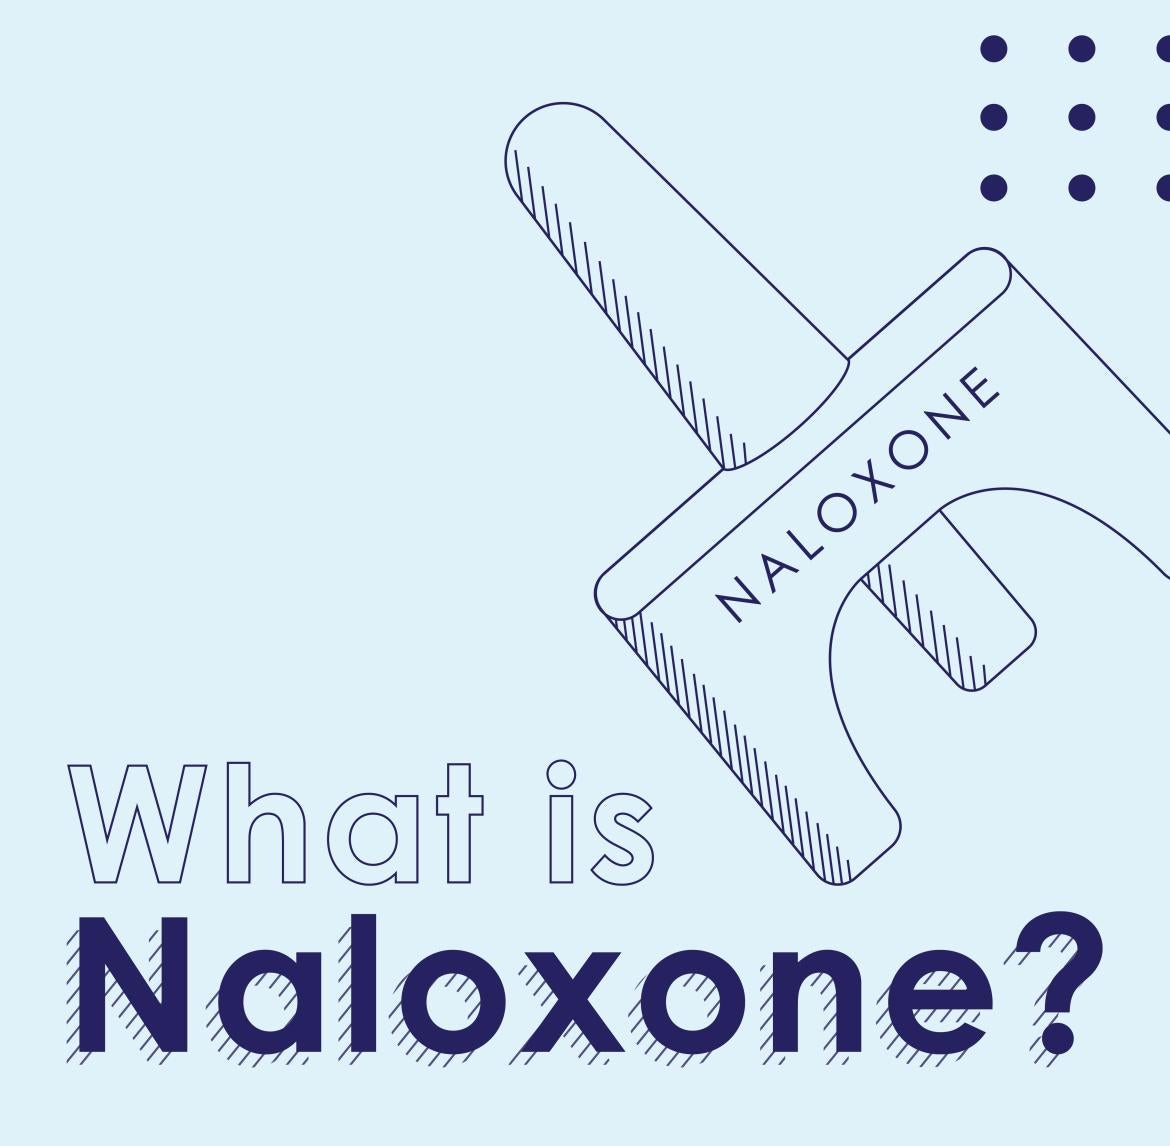 Naloxone graphic with "What is Naloxone?" in design text